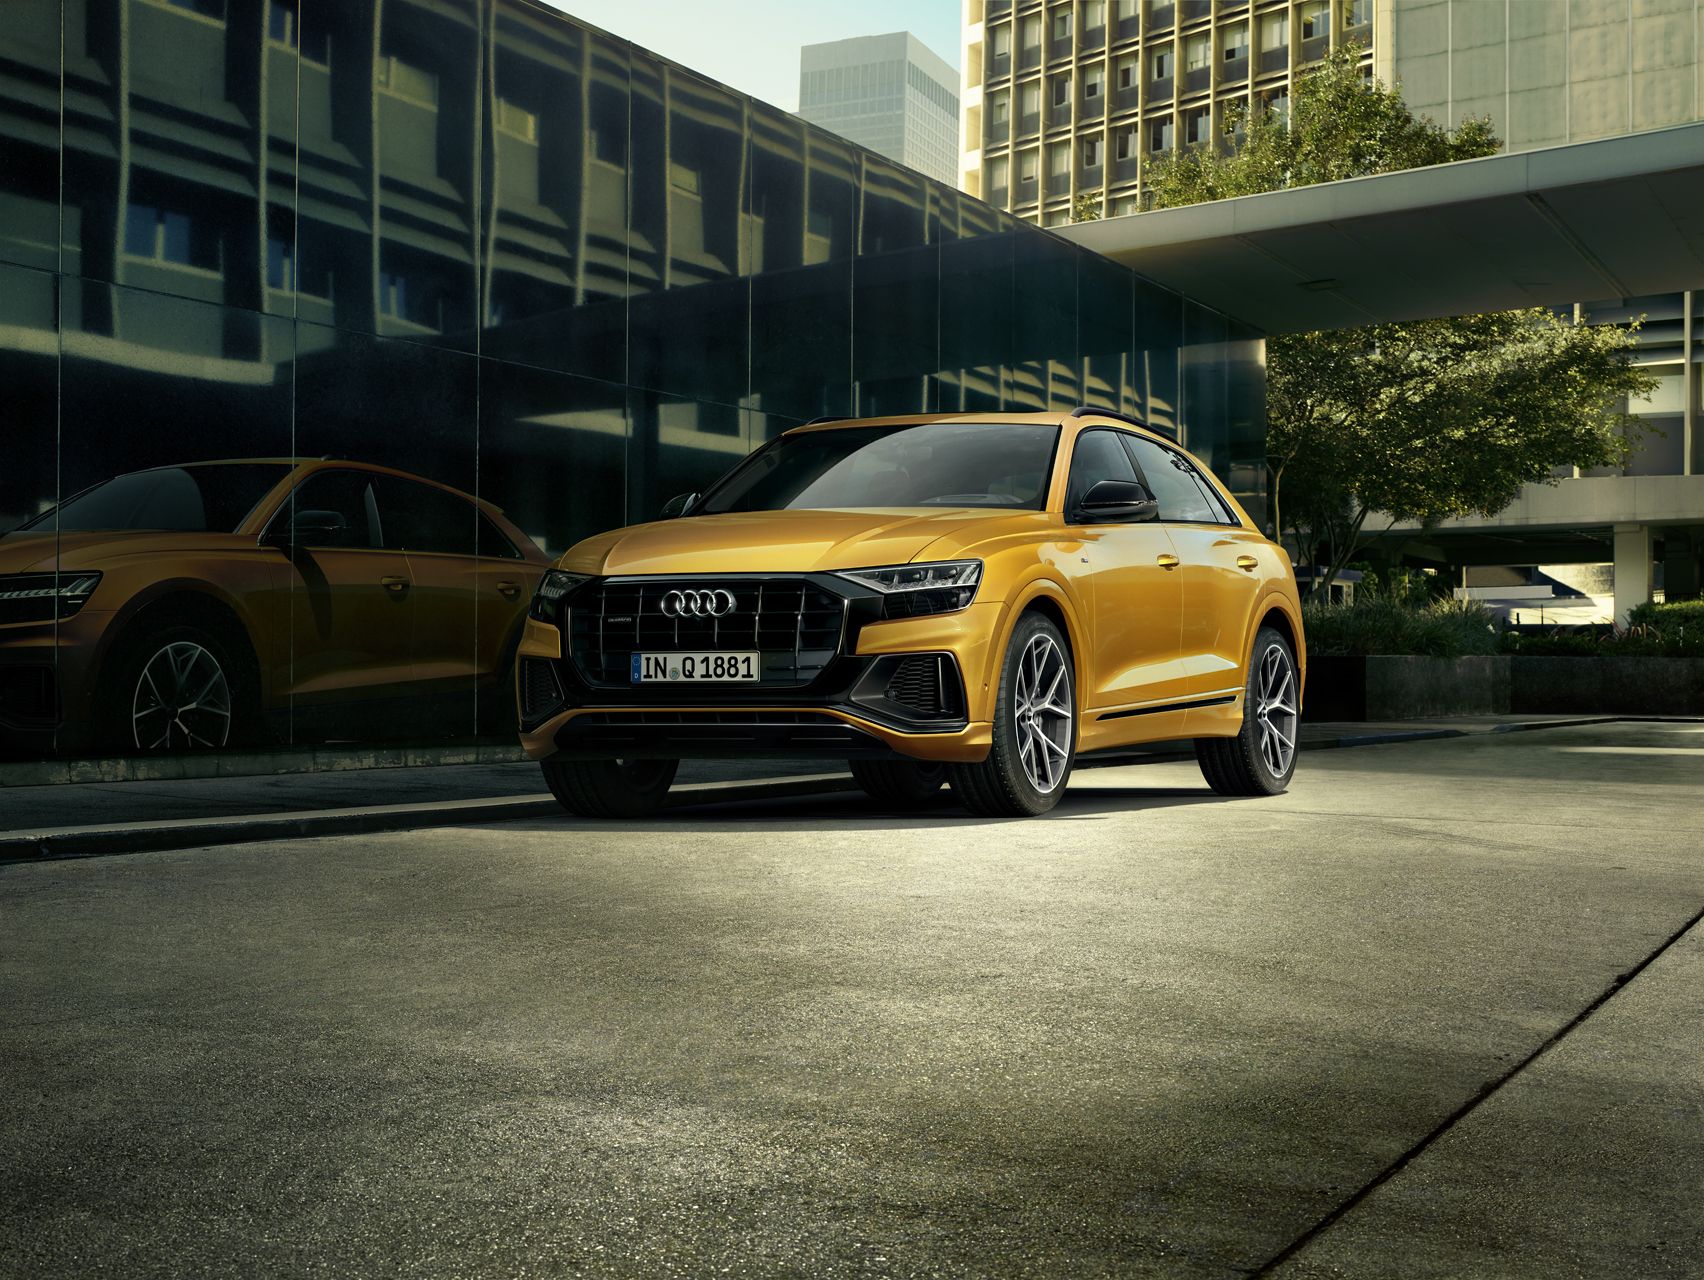 Lord Of The Road: The Audi Q8 Is Beautiful, Daring, And Audacious